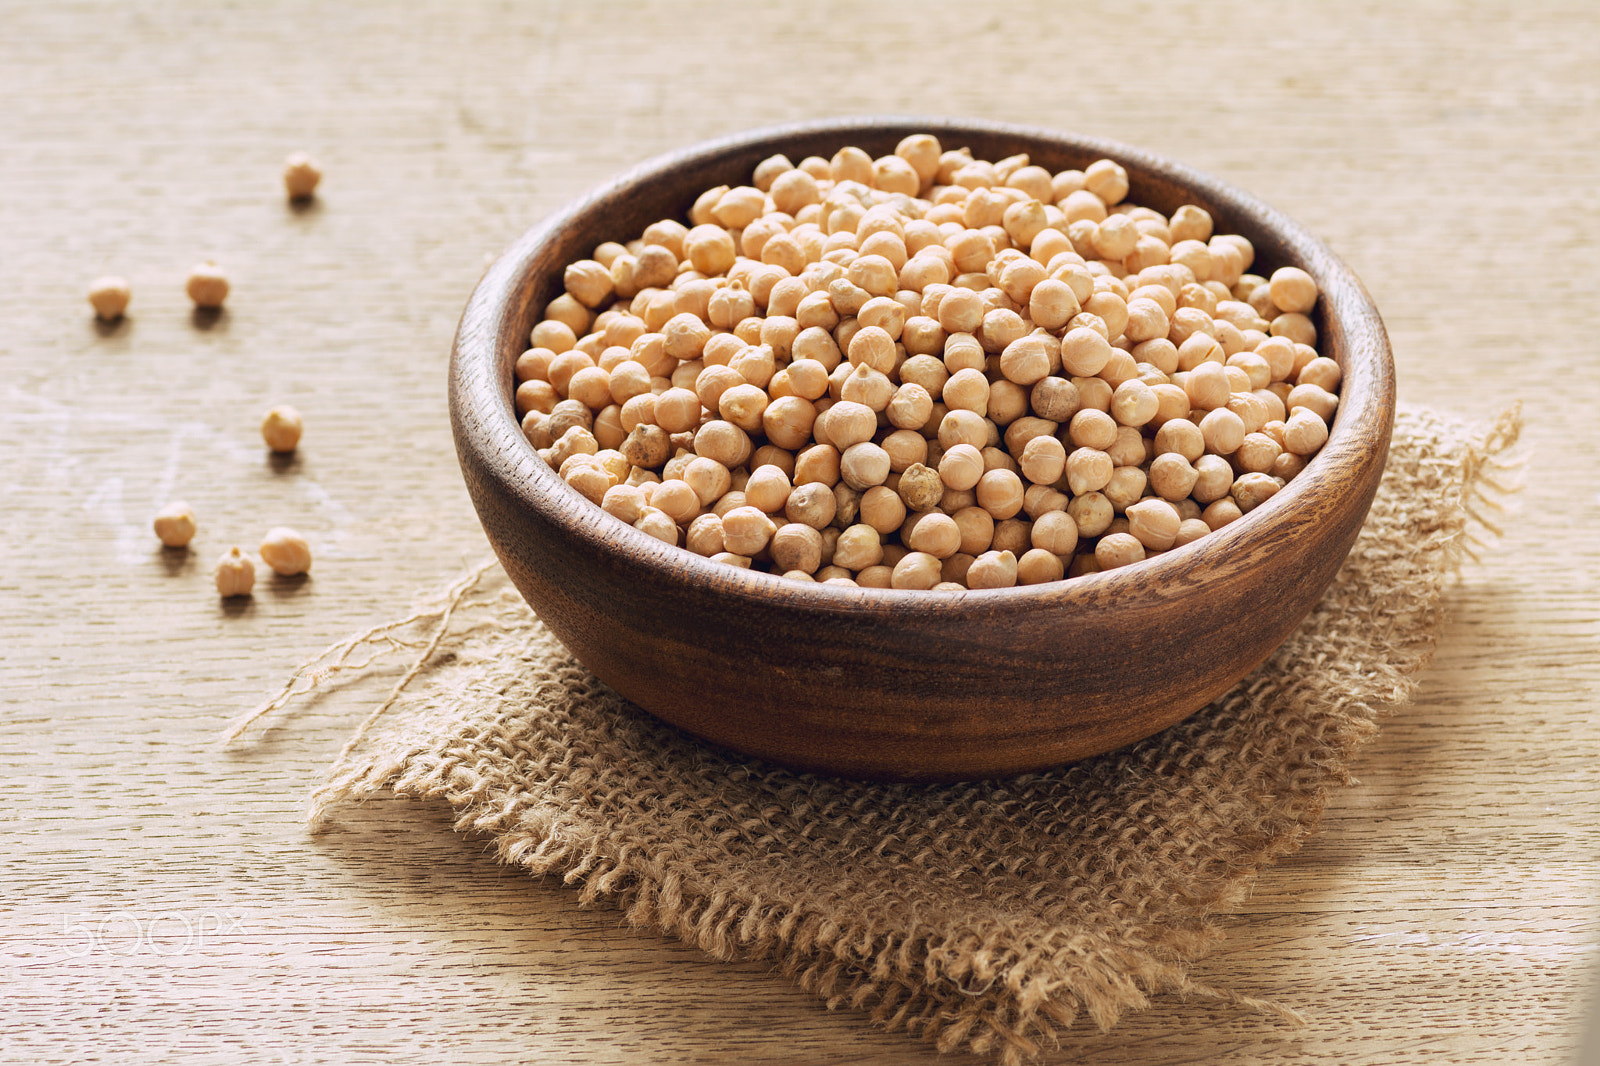 Nikon D7100 sample photo. Chickpeas in wooden bowl photography